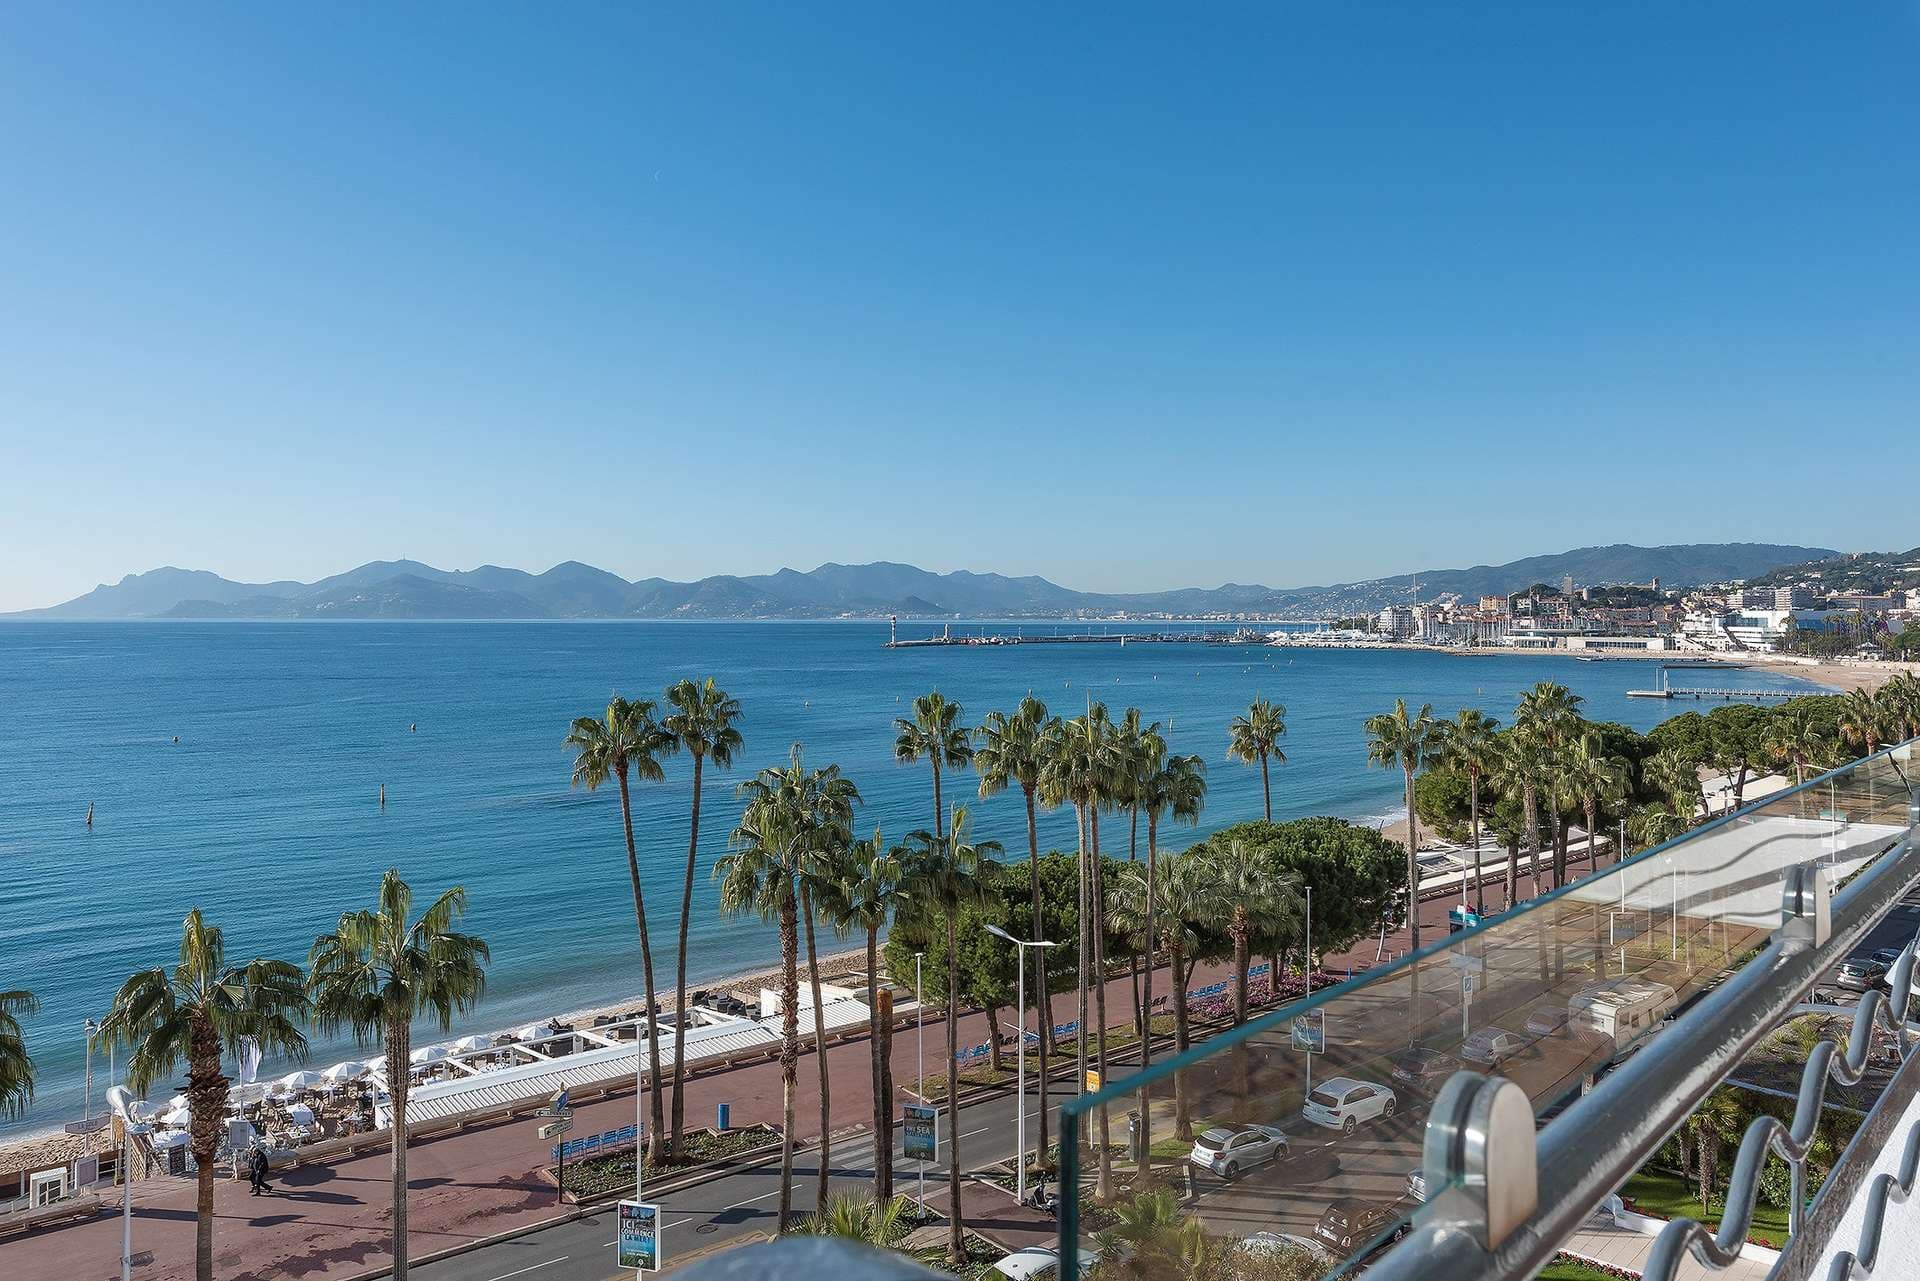 2 Bedroom Apartment For Sale Cannes Lp01009 249b82f70f014800.jpg